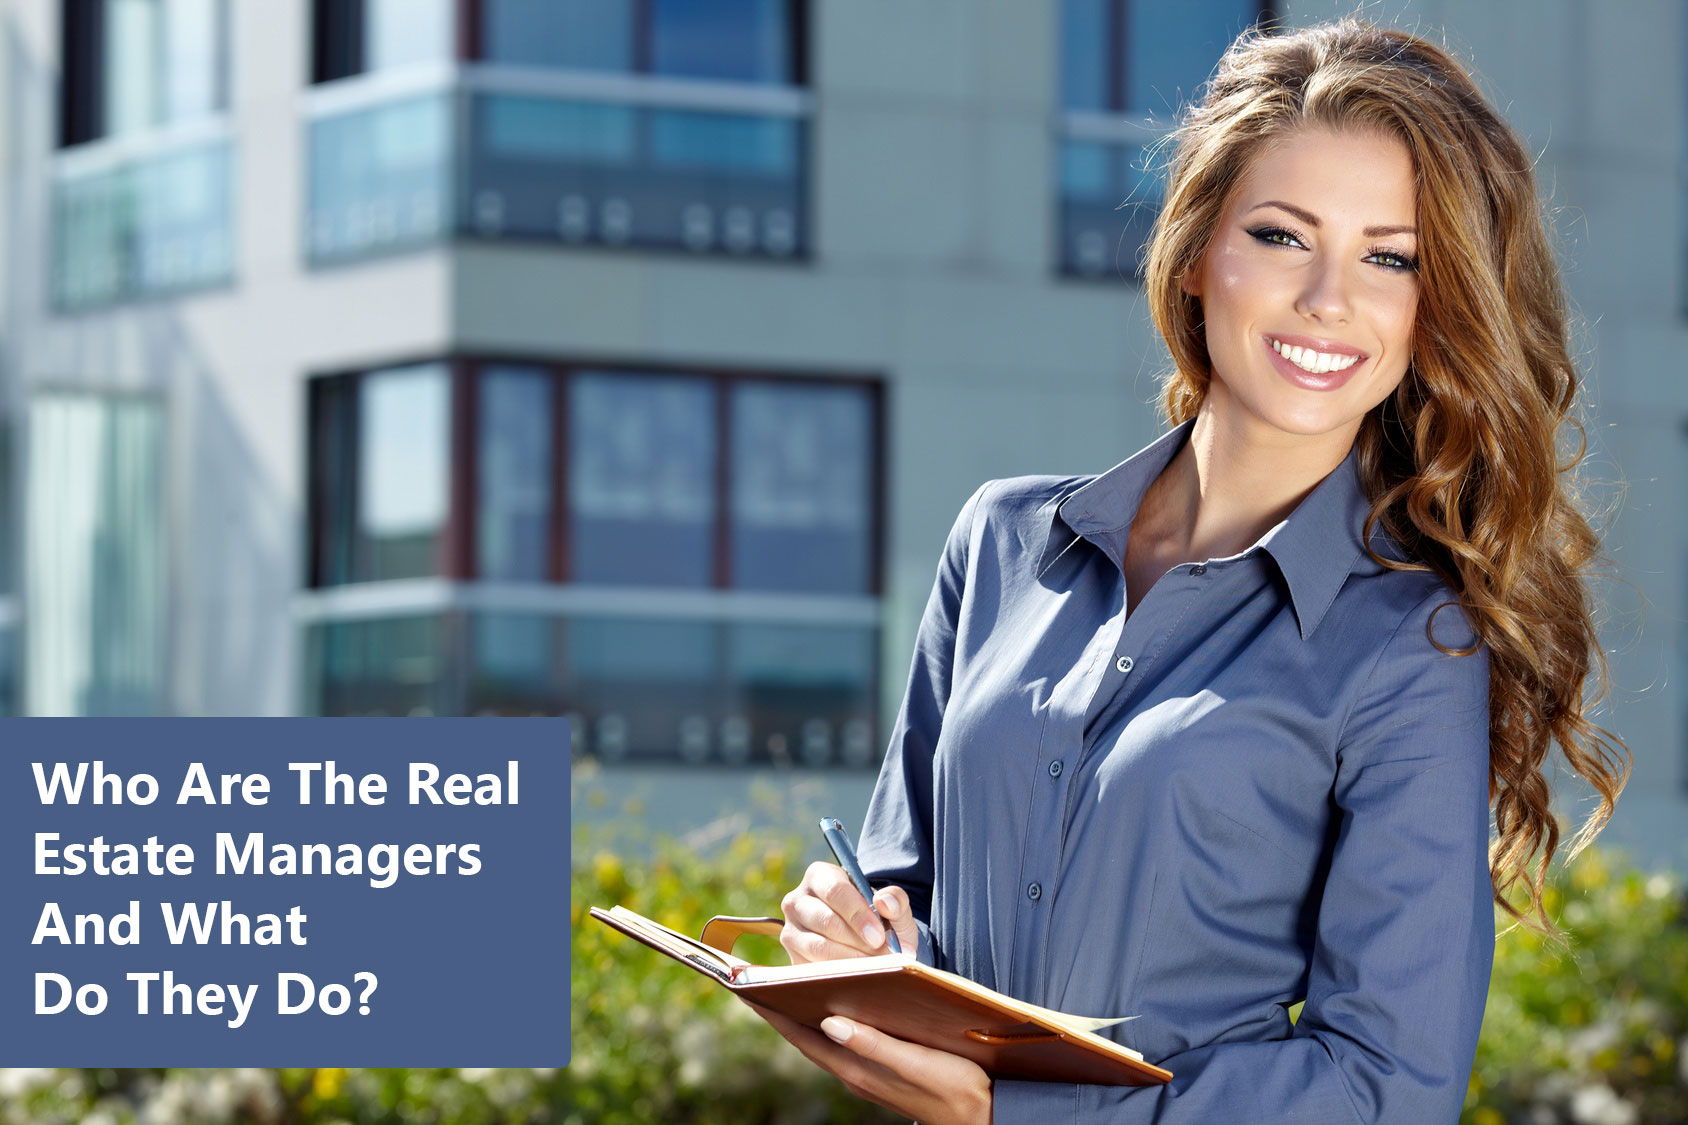 Who Are The Real Estate Managers And What Do They Do?